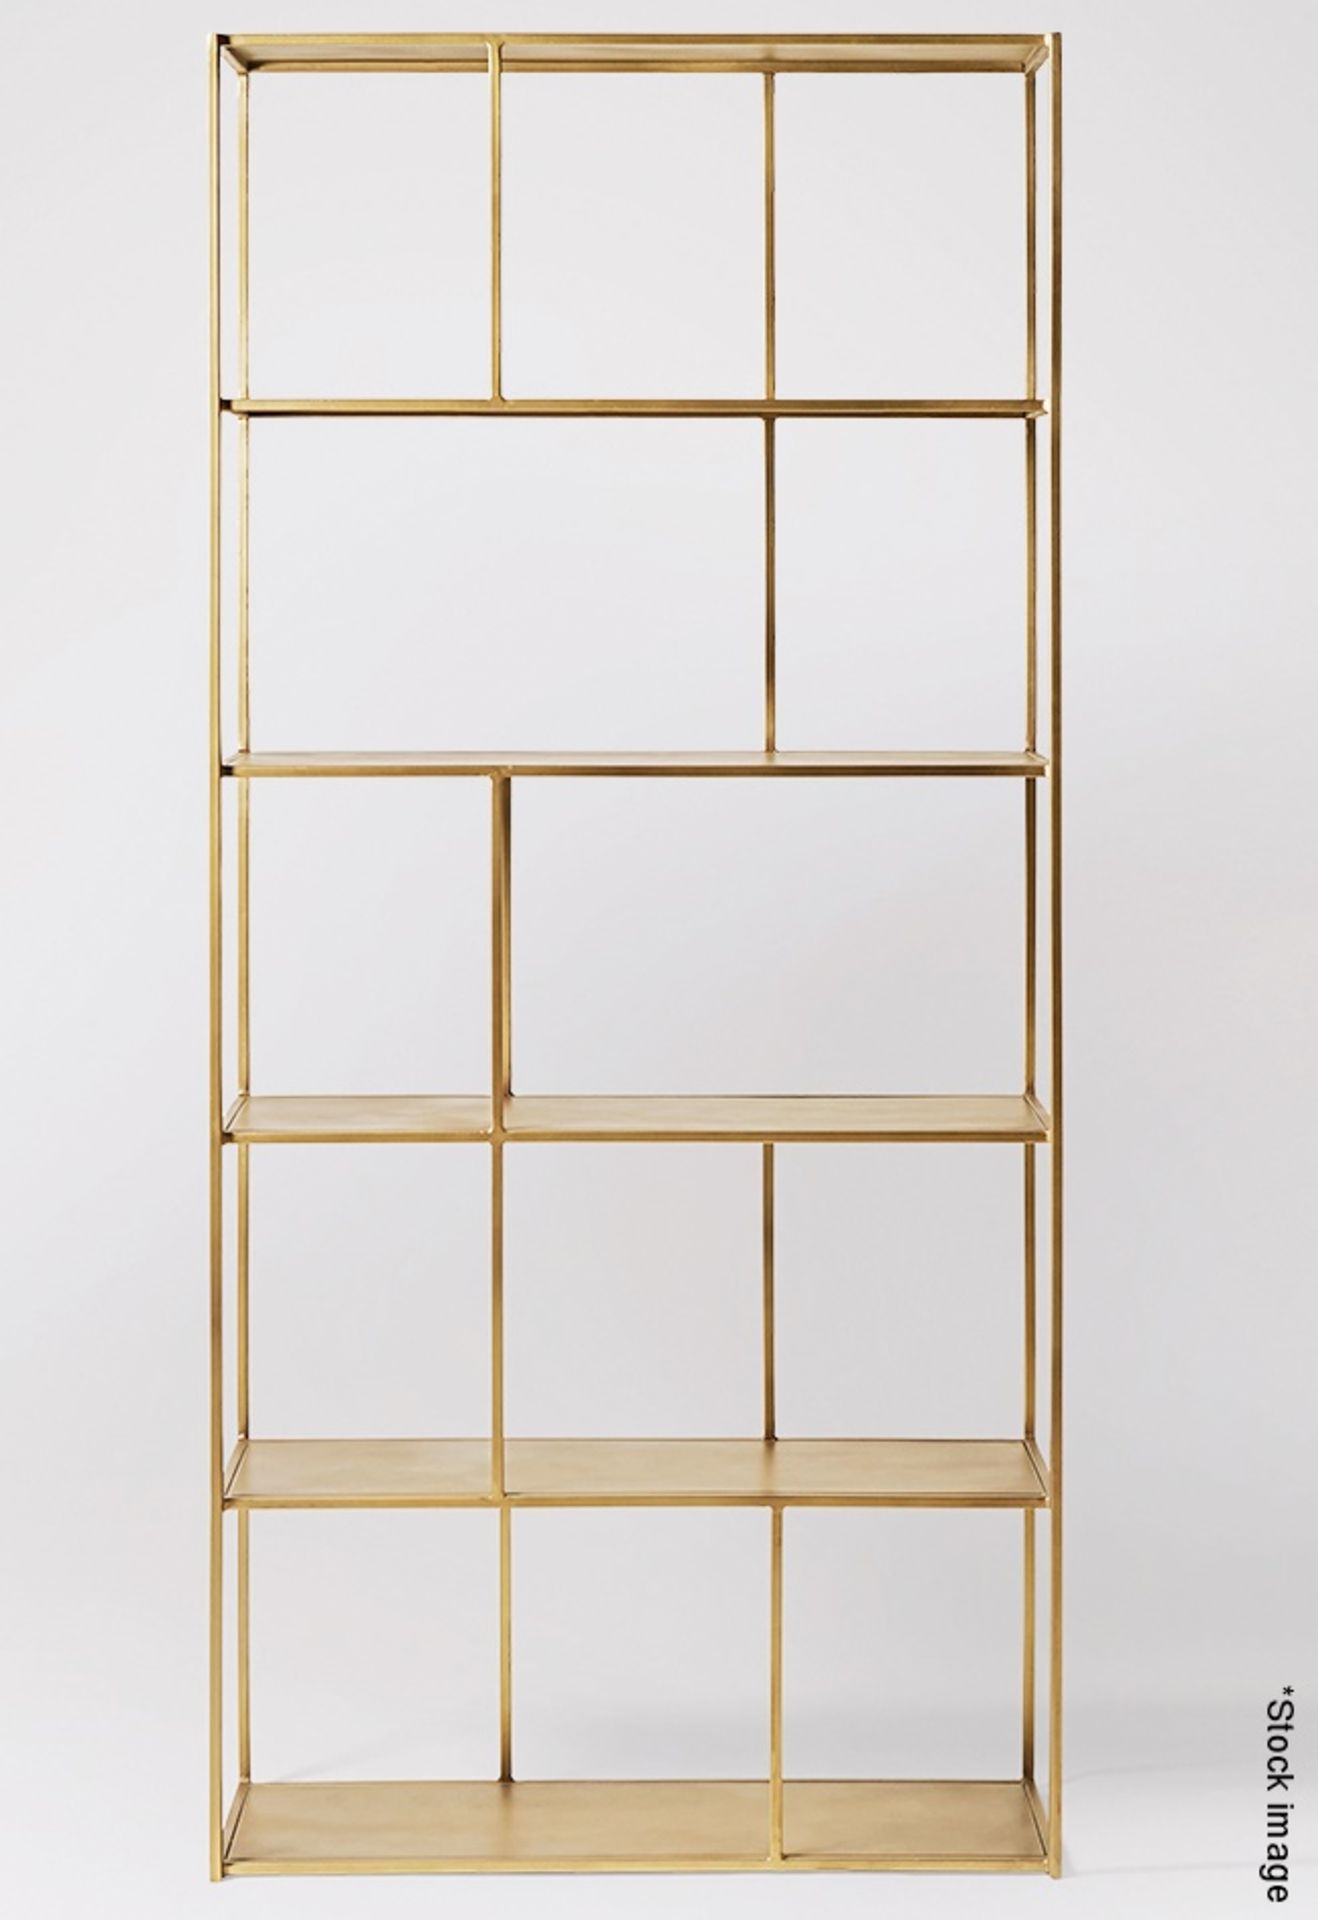 1 x SWOON 'Aero' Handcrafted Art Deco Inspired Book Case Shelving Unit - Original Price £599.00 - Image 2 of 7